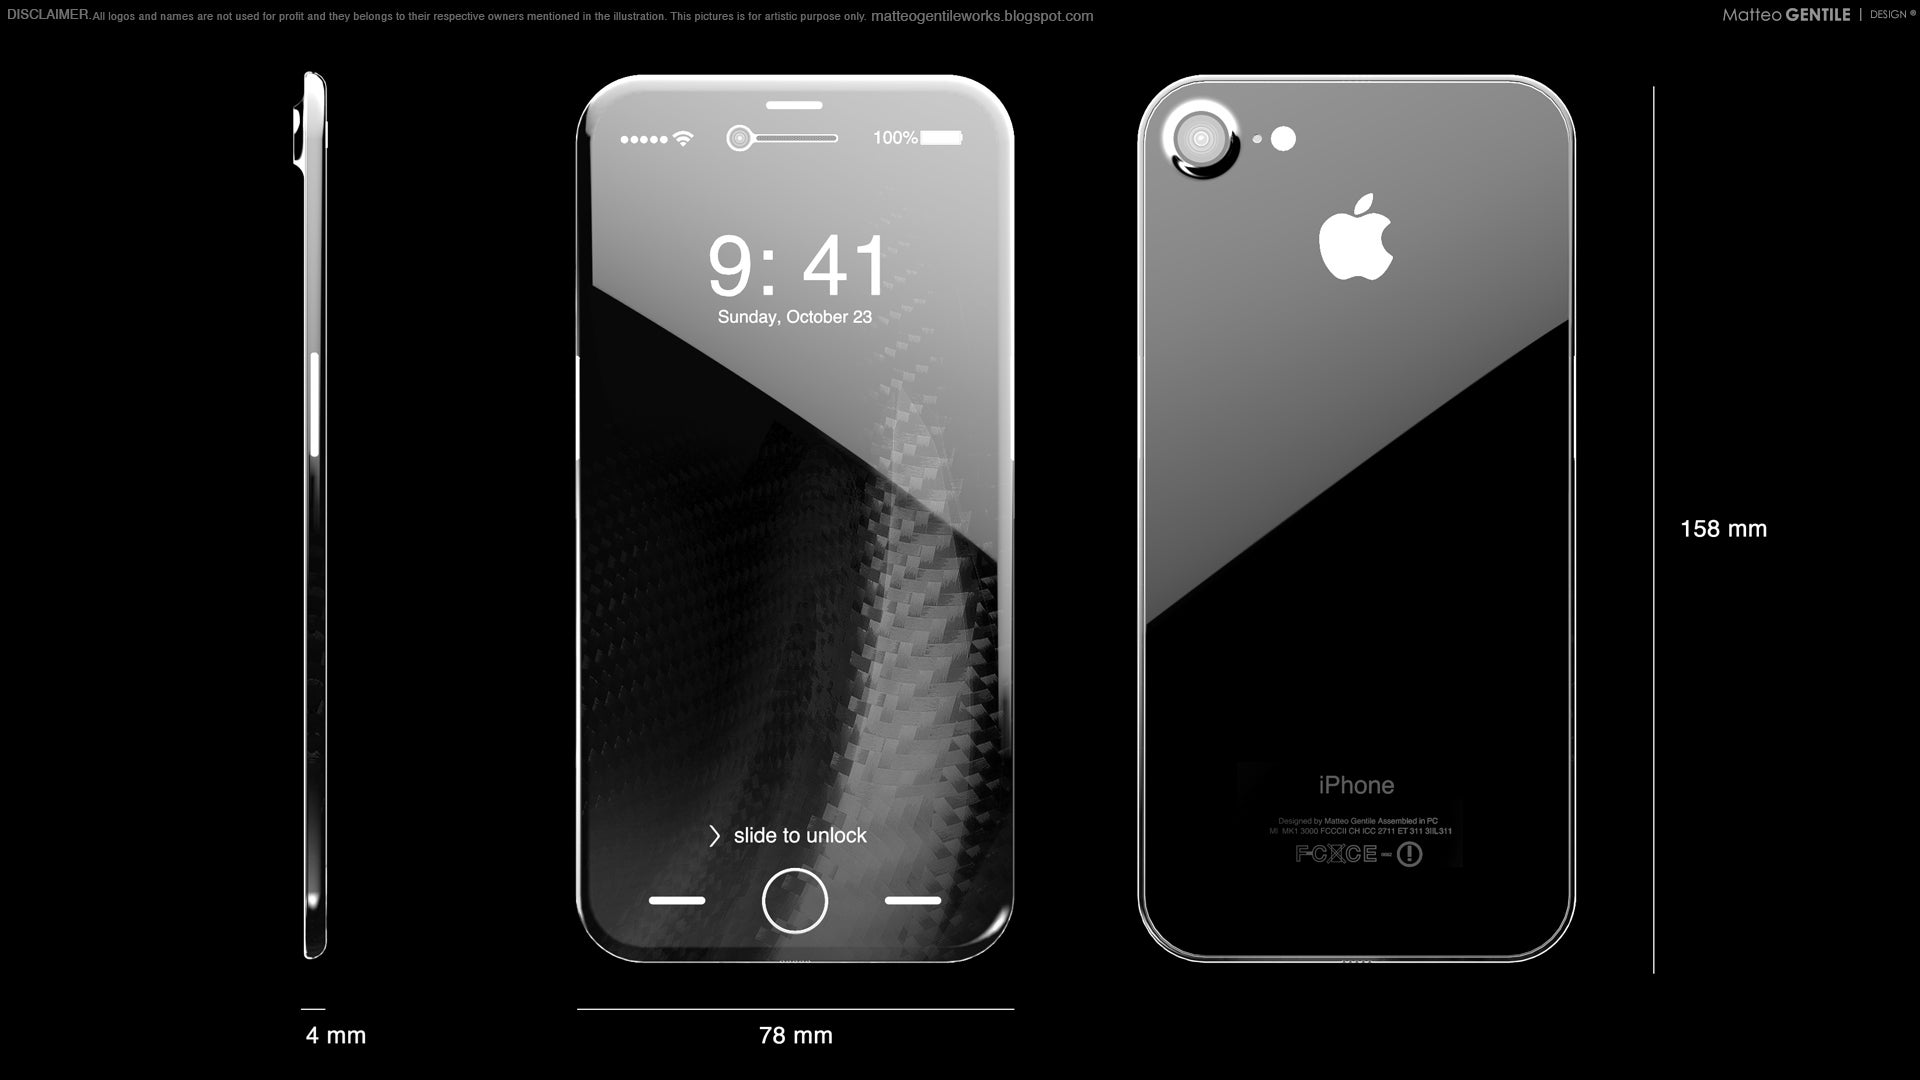 Wraparound display, embedded sensors - this OLED iPhone 8 concept image tries to depict Apple's 2017 surprise - OLED 'iPhone X' with 5.8" wraparound display prepped for a 'feature-rich' launch, tips analyst